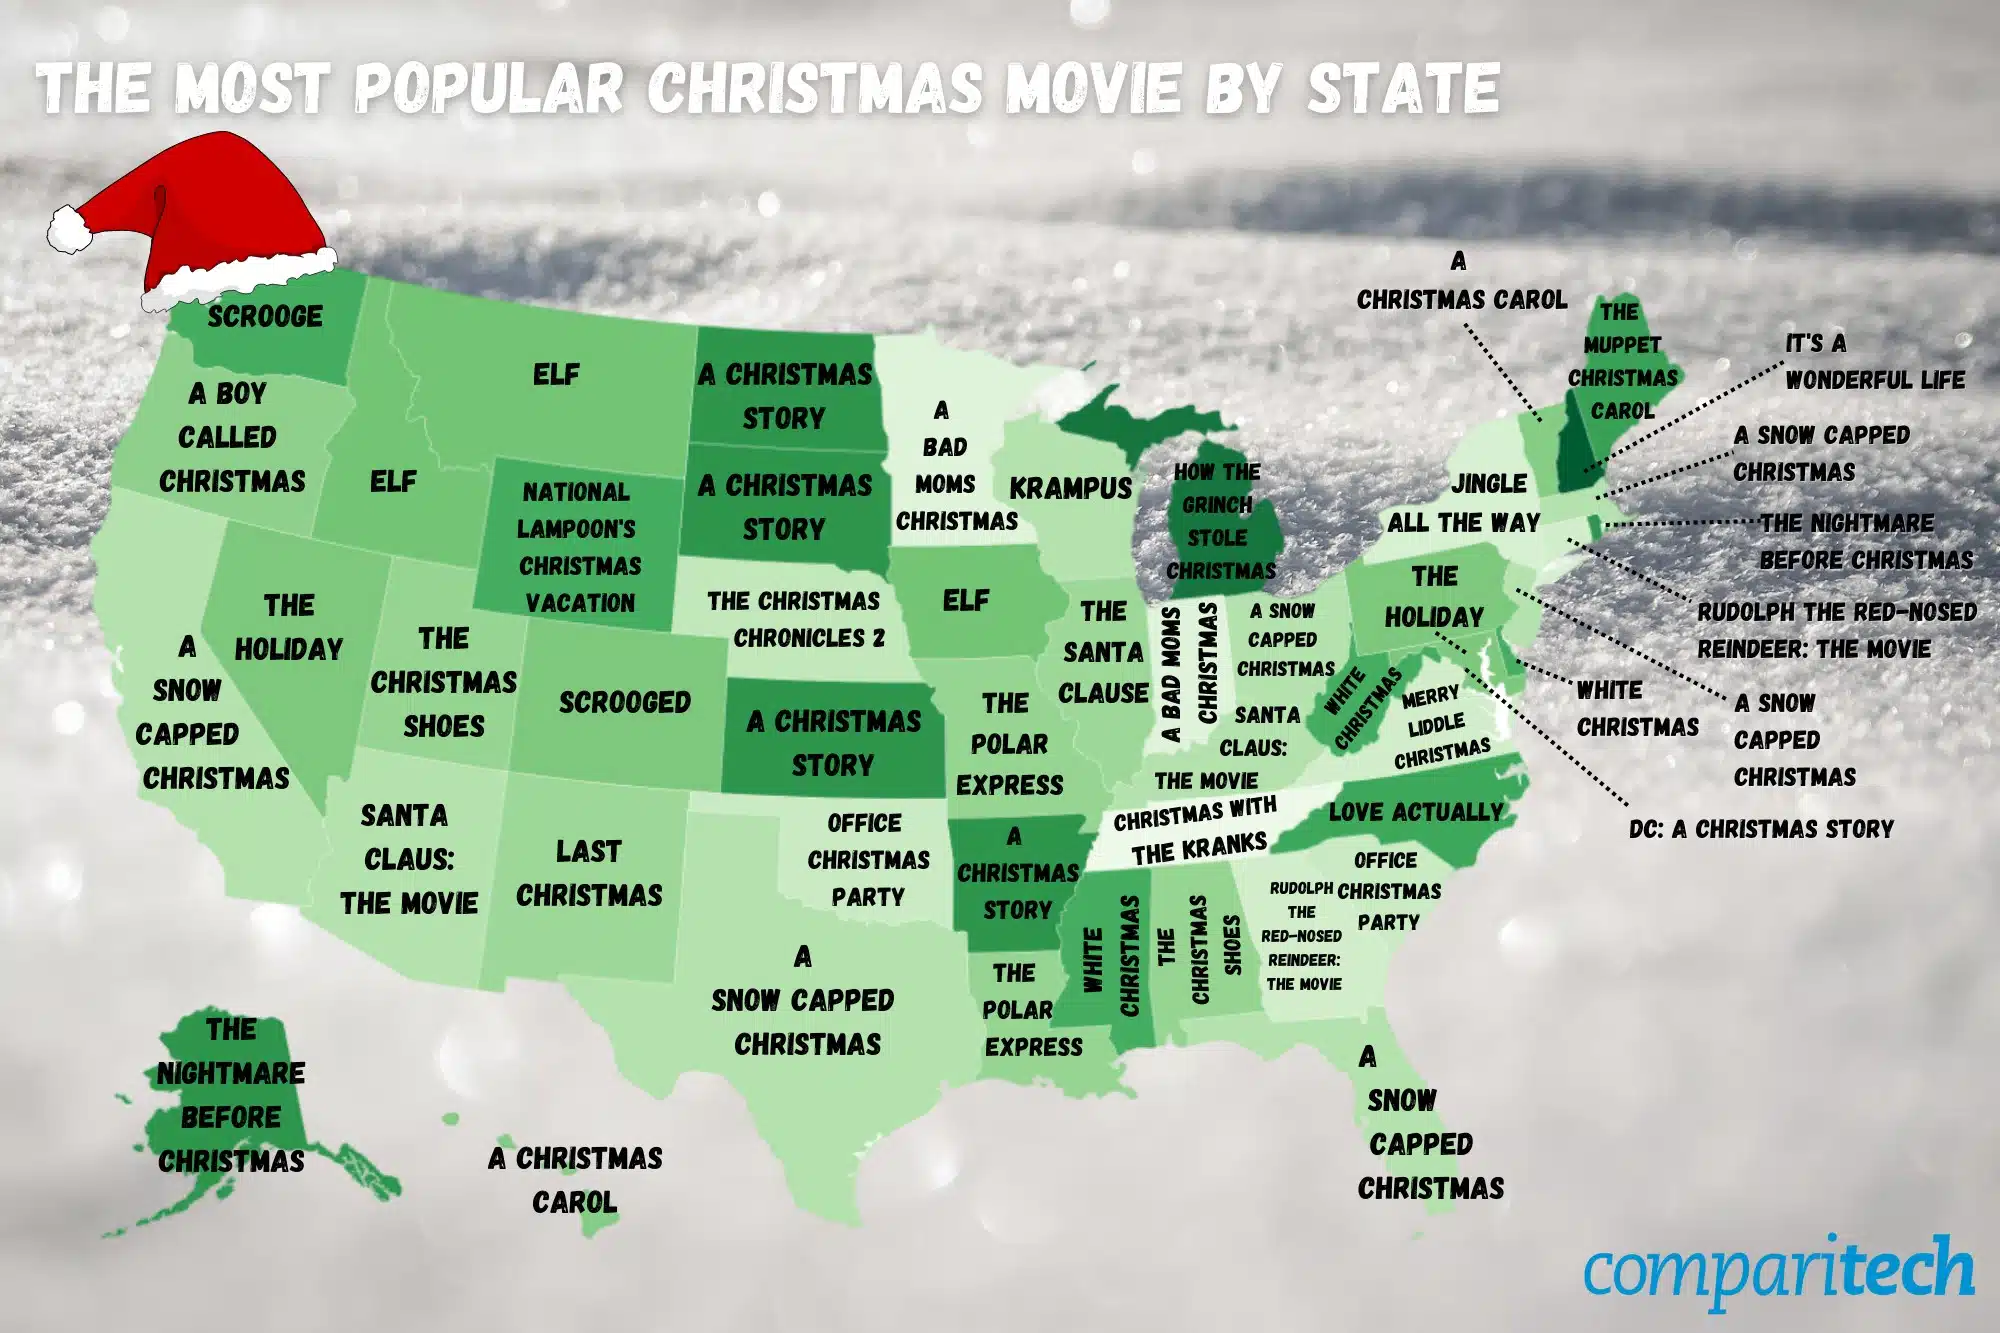 The most popular Christmas movie by state